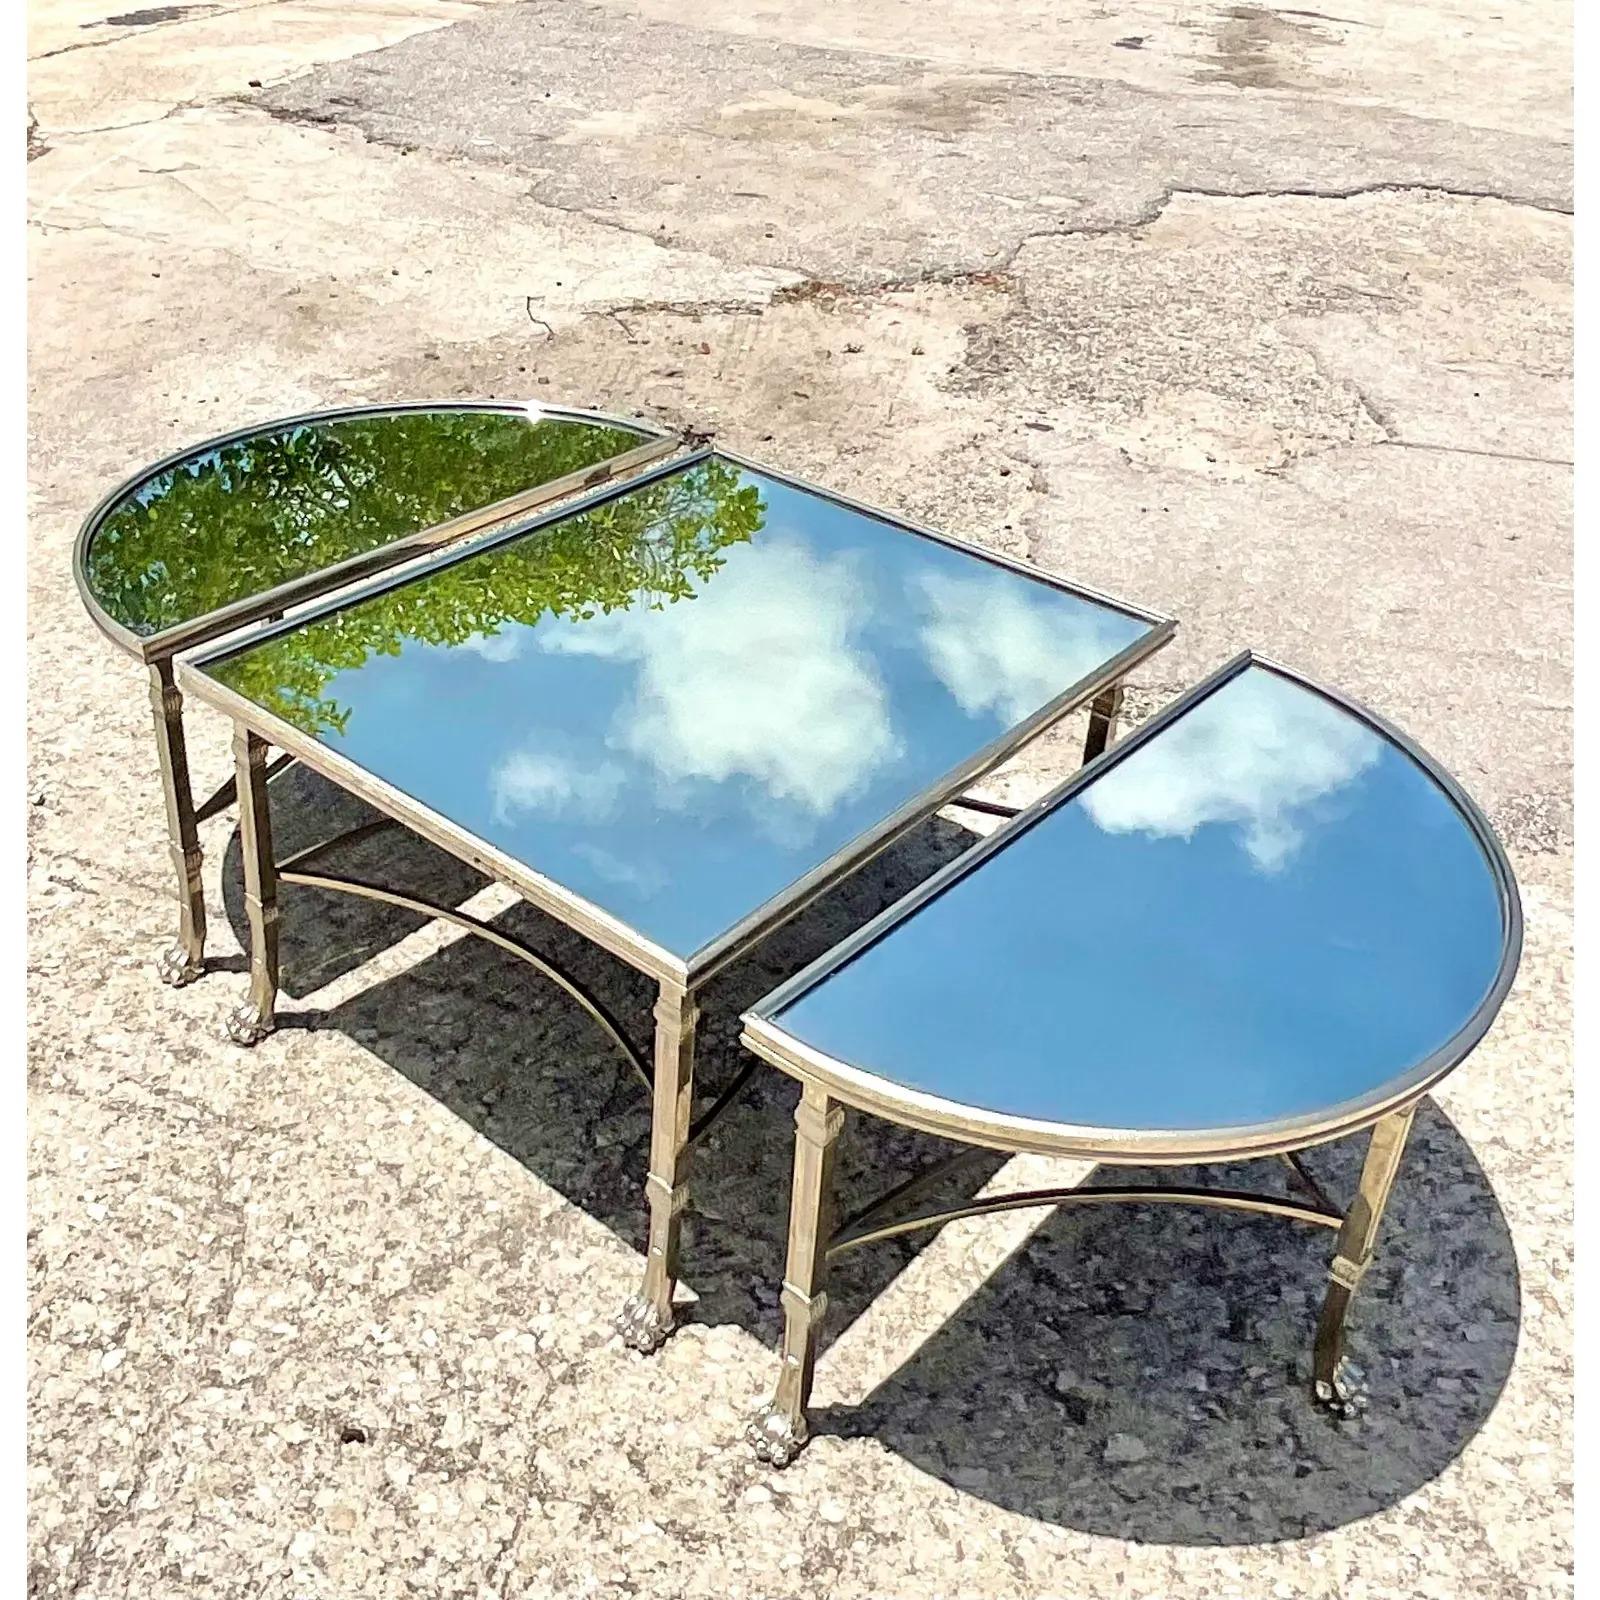 Fantastic vintage Lorin Marsh coffee table. Beautiful polished nickel in a chic Regency design. The table has three separate tables that are put together to create one table. Can also be separated to three distinct smaller tables. You decide!